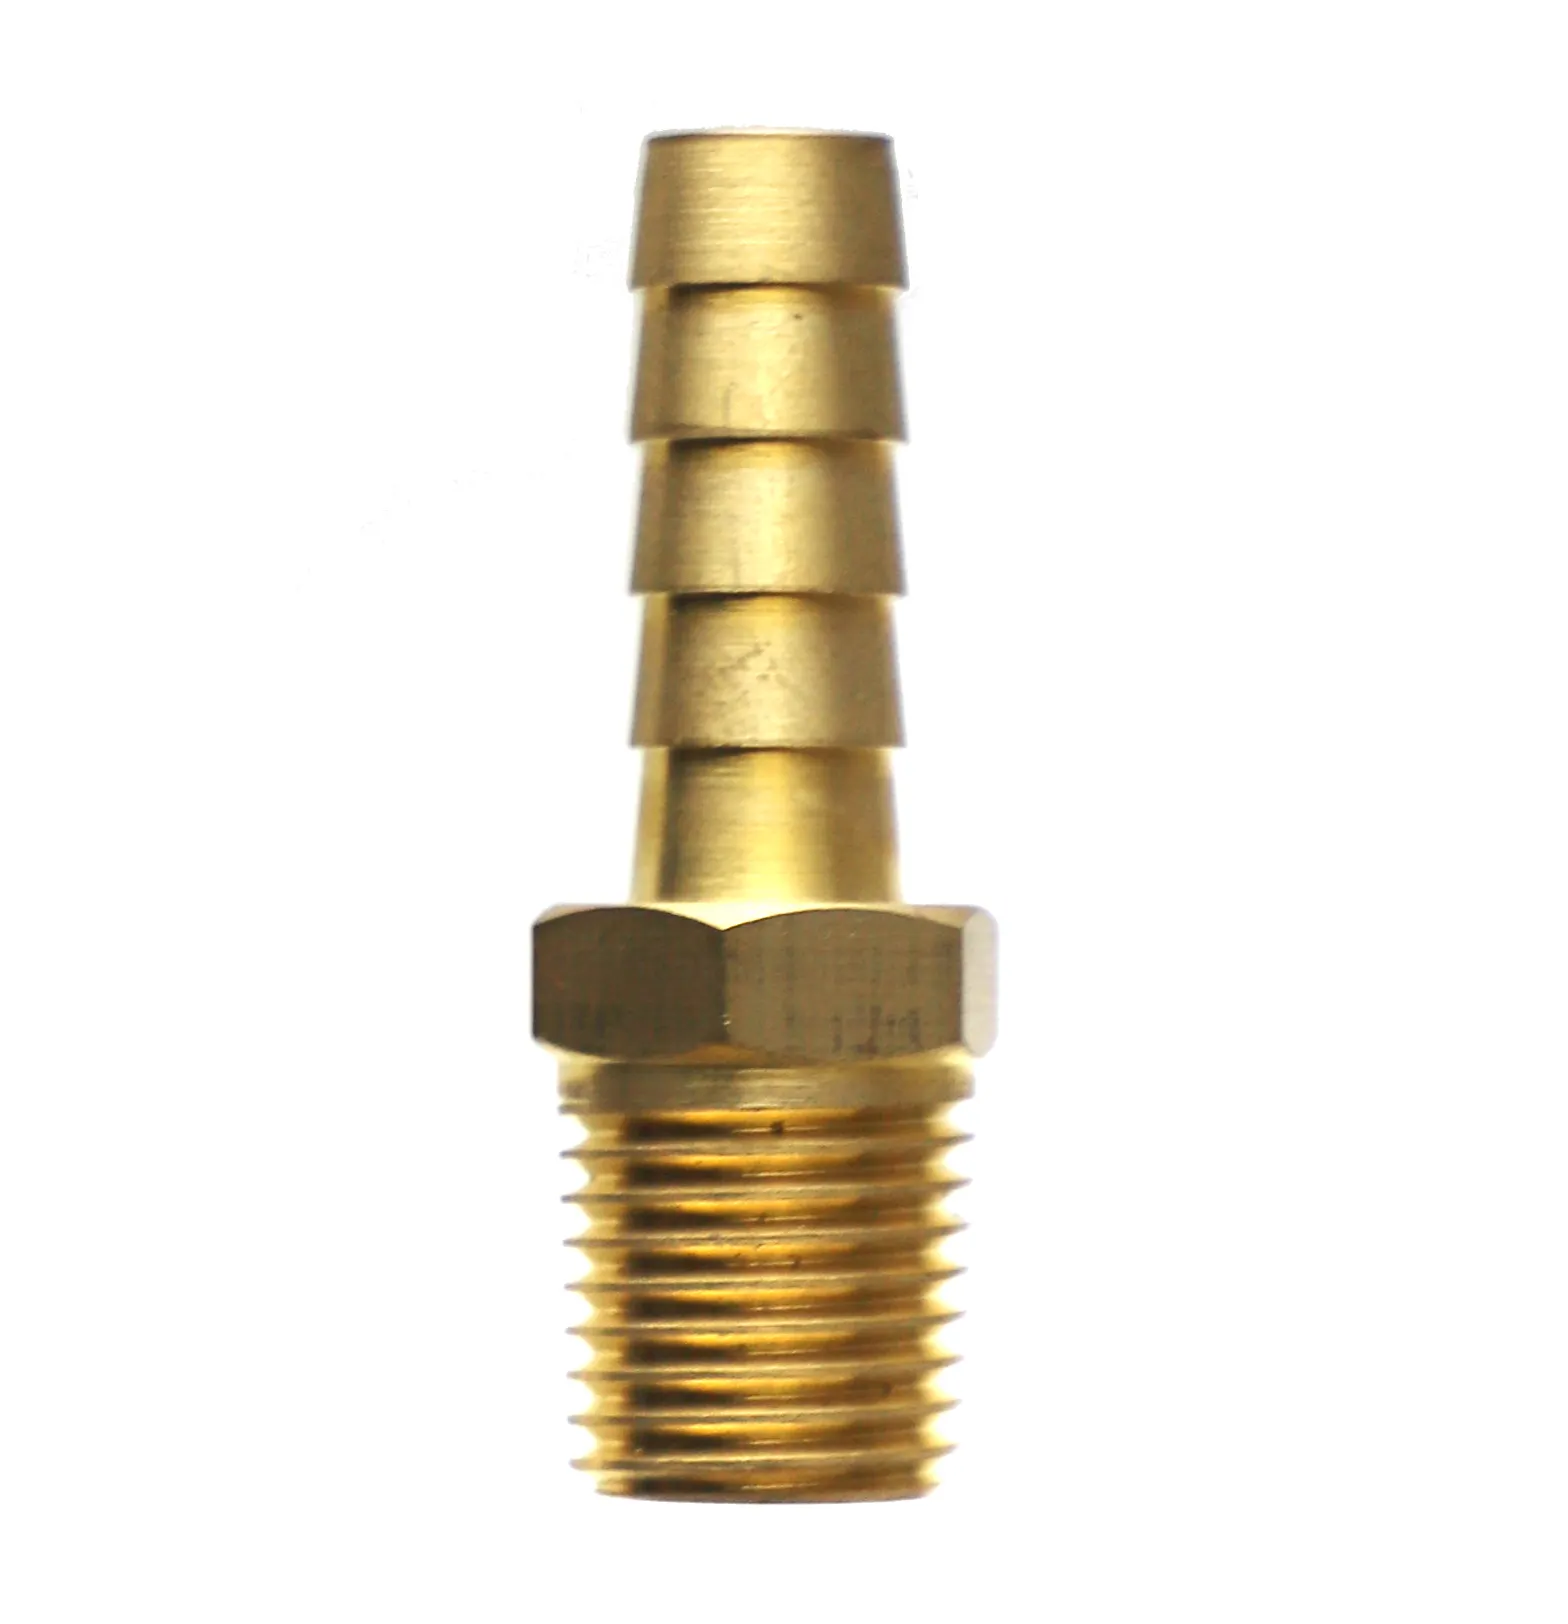 Hose Male Thread to Barb Brass Hex Nipple Adapter Pipe Tube Fittings Quick Connecter